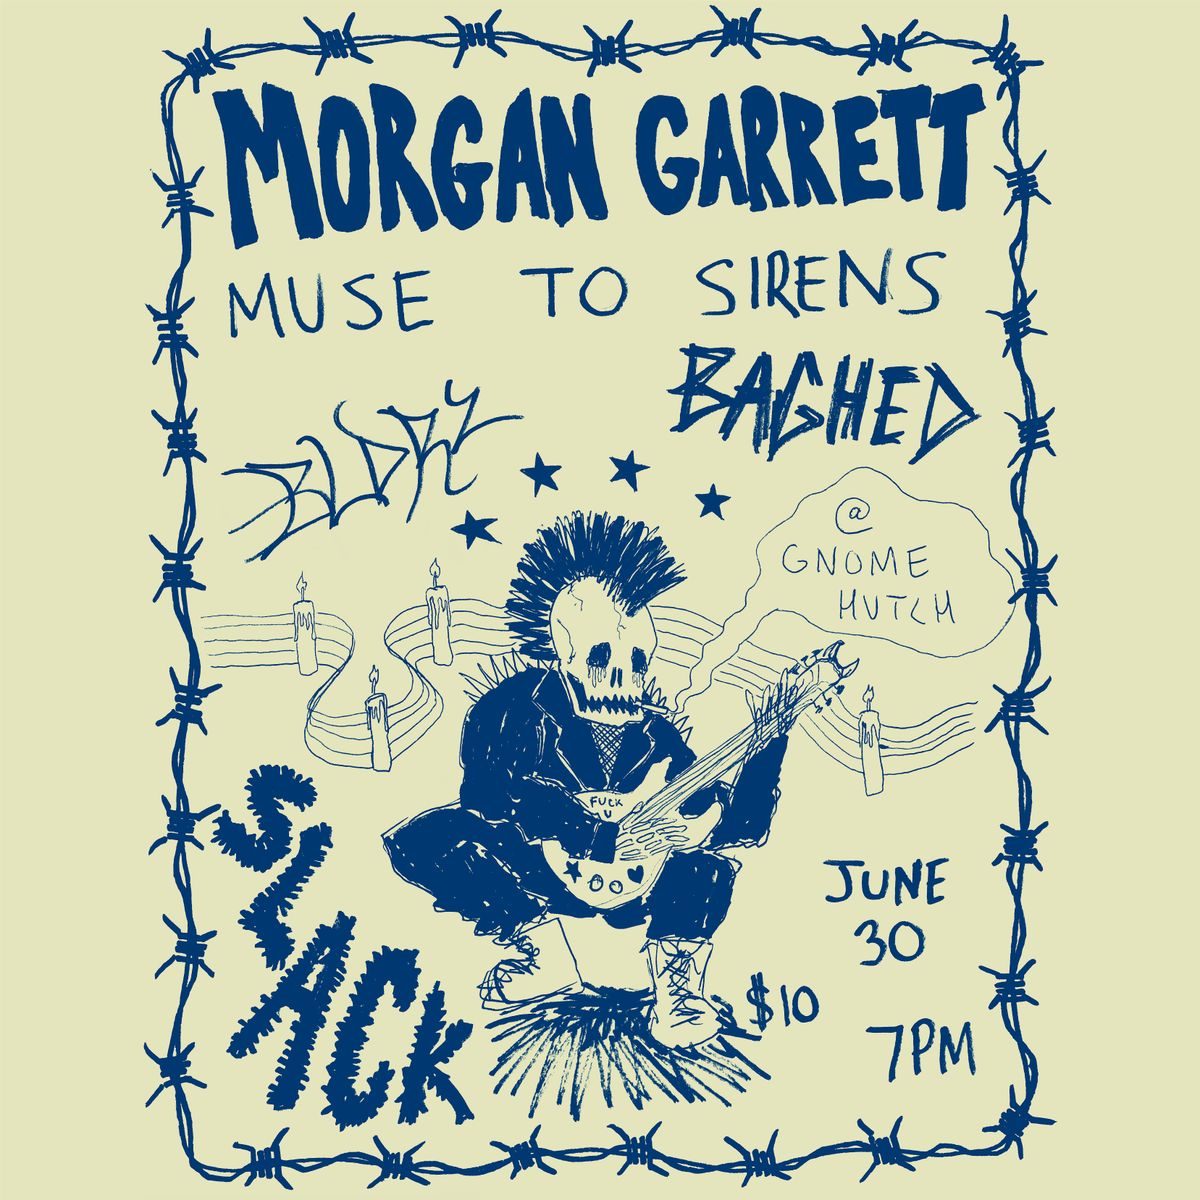 Morgan Garrett + Slack + Muse to Sirens + BAGHED + BLEEDERS at Gnome Hutch